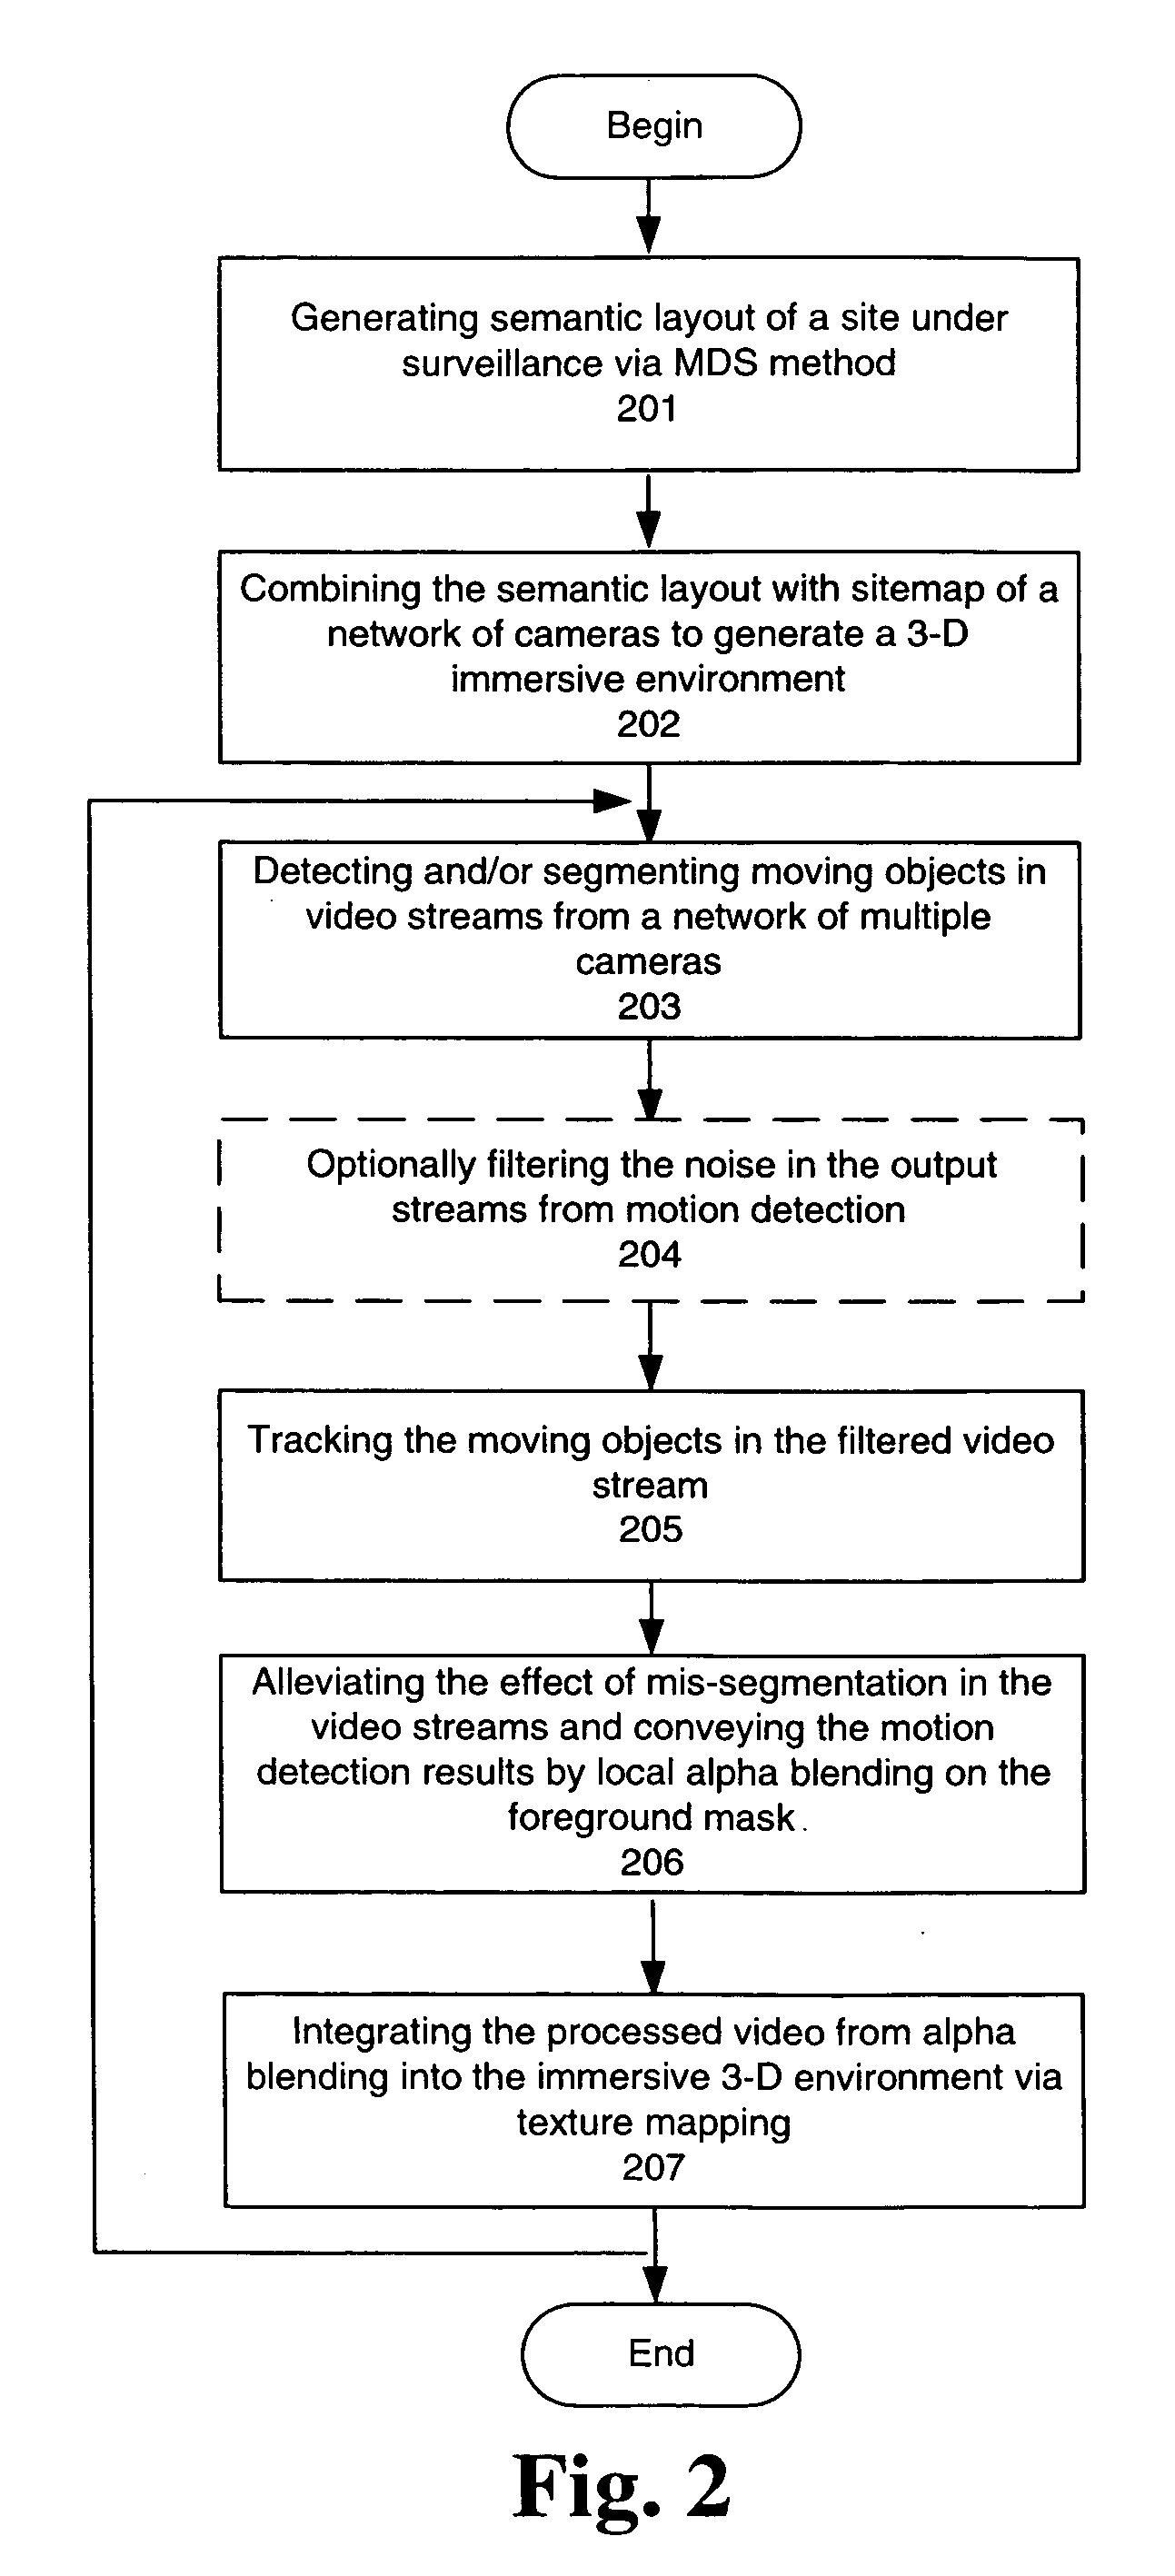 System and method for analyzing and monitoring 3-D video streams from multiple cameras